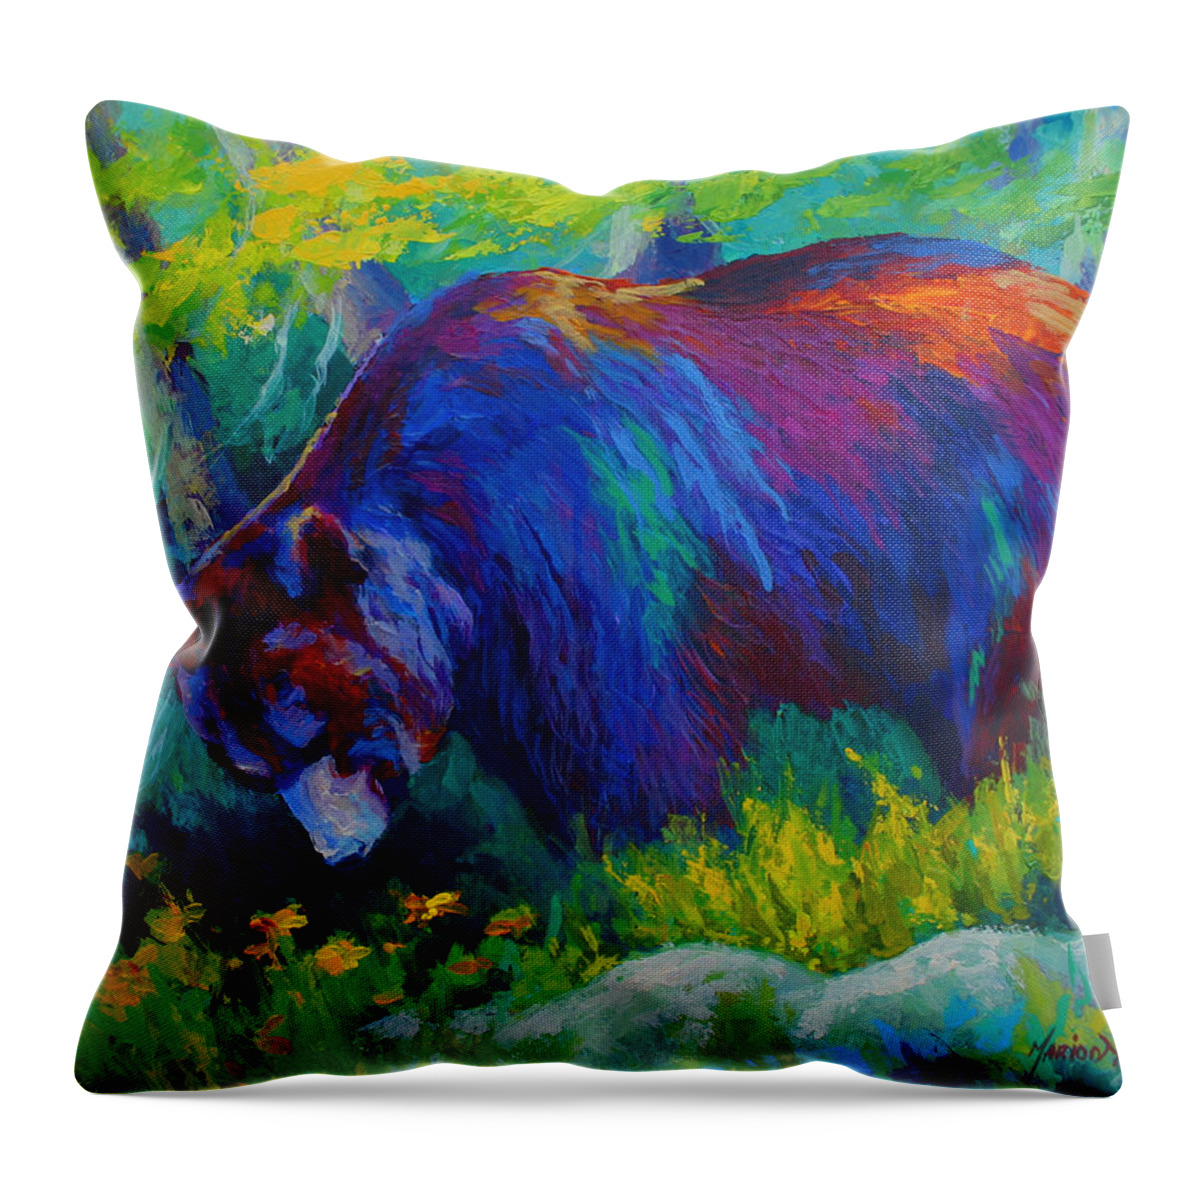 Dandelions For Dinner Black Bear Throw Pillow For Sale By Marion